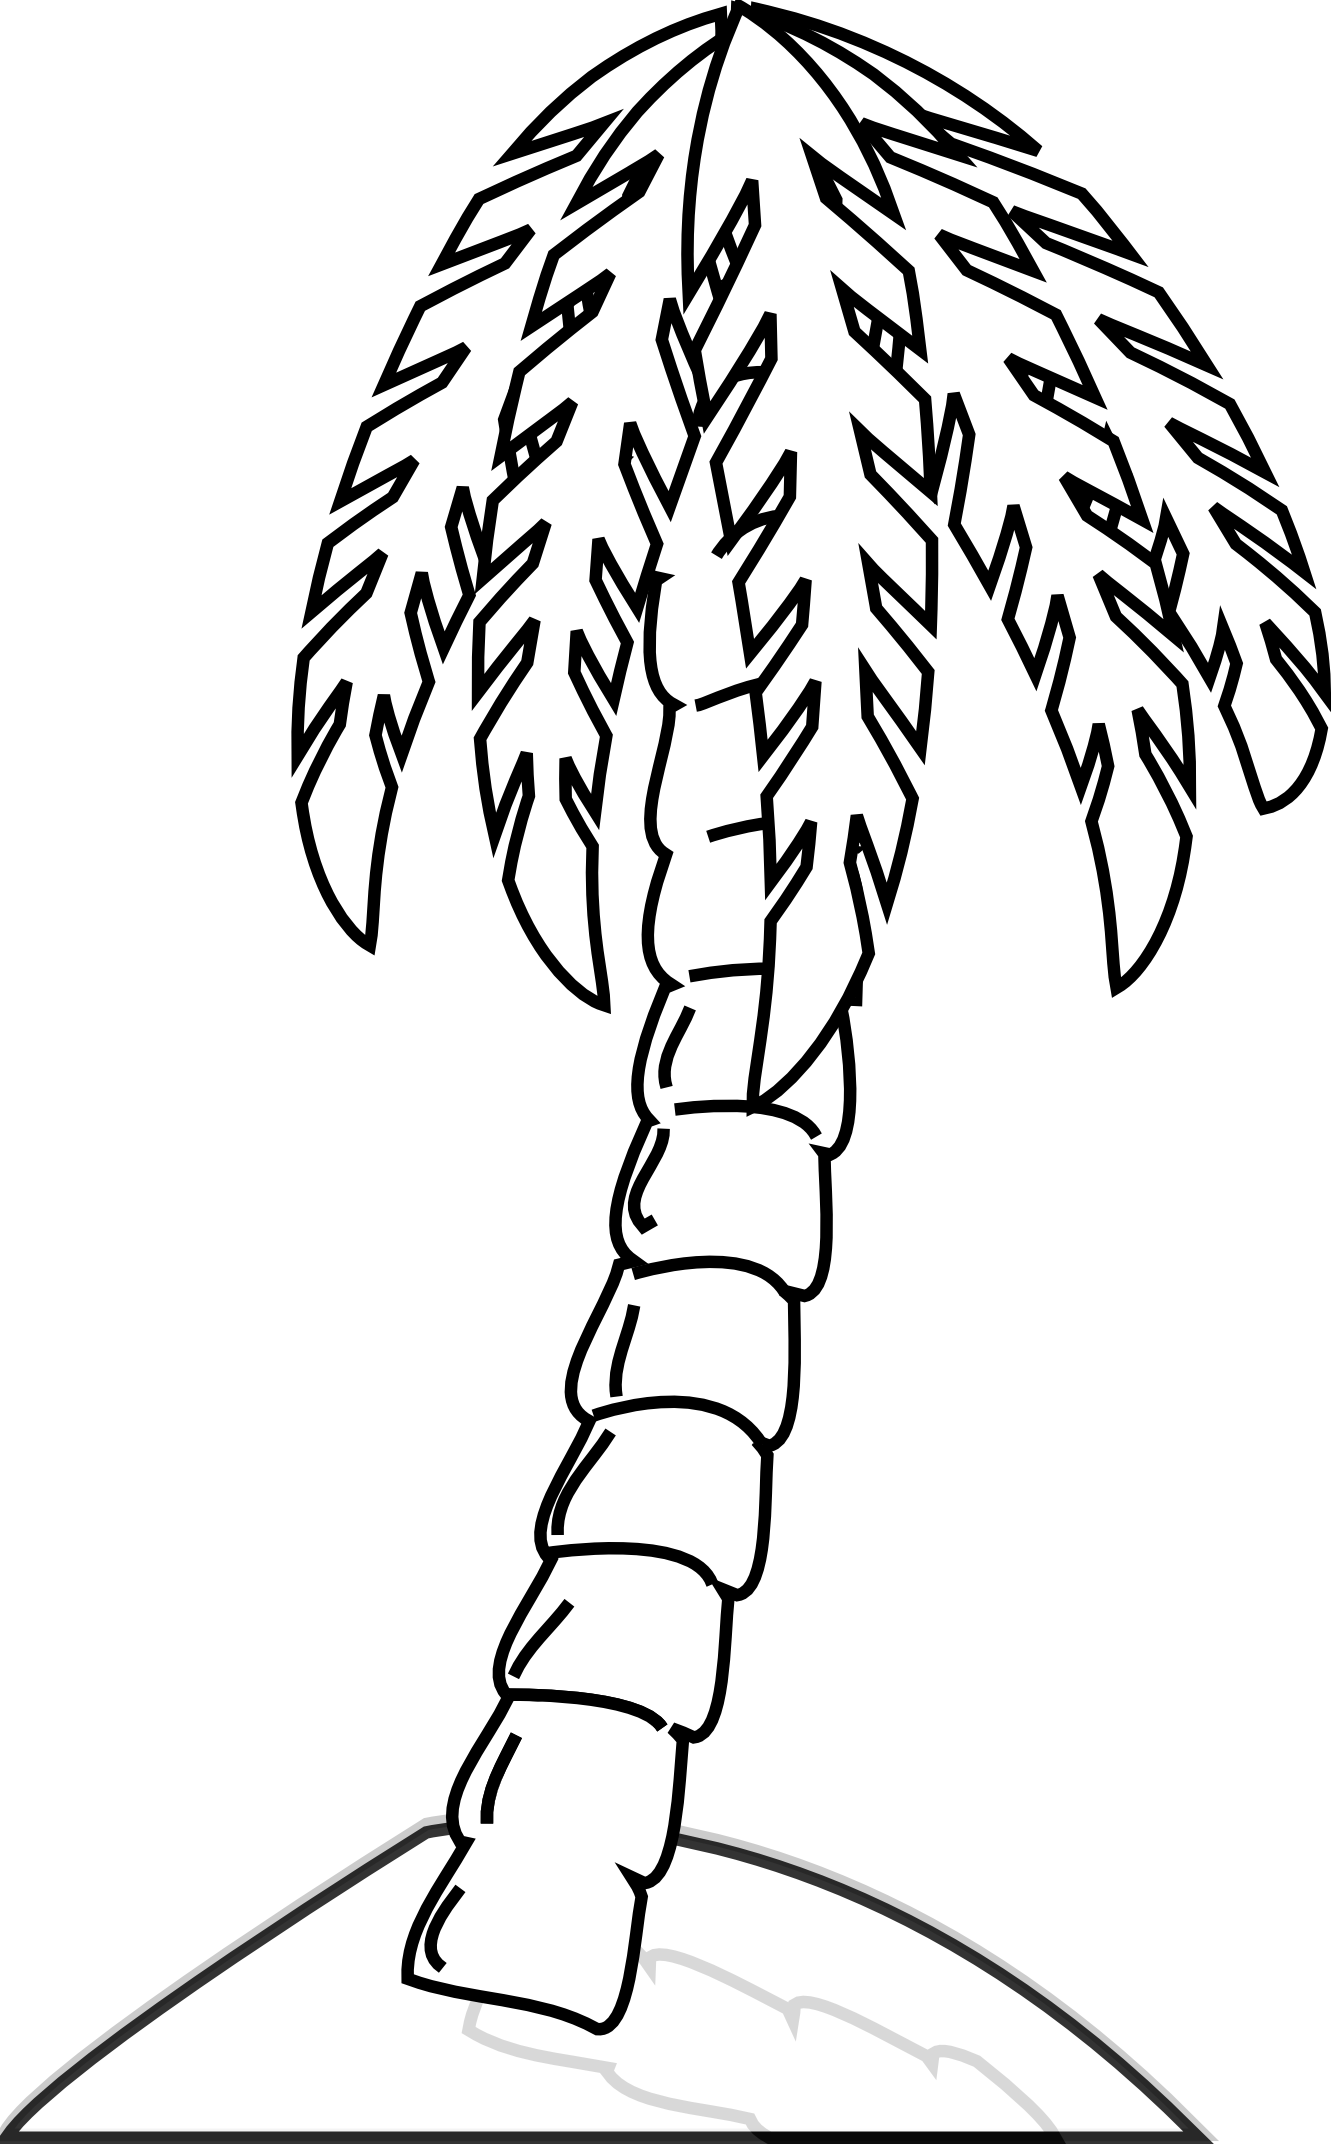 Palm Tree Line Drawing - Clipart library